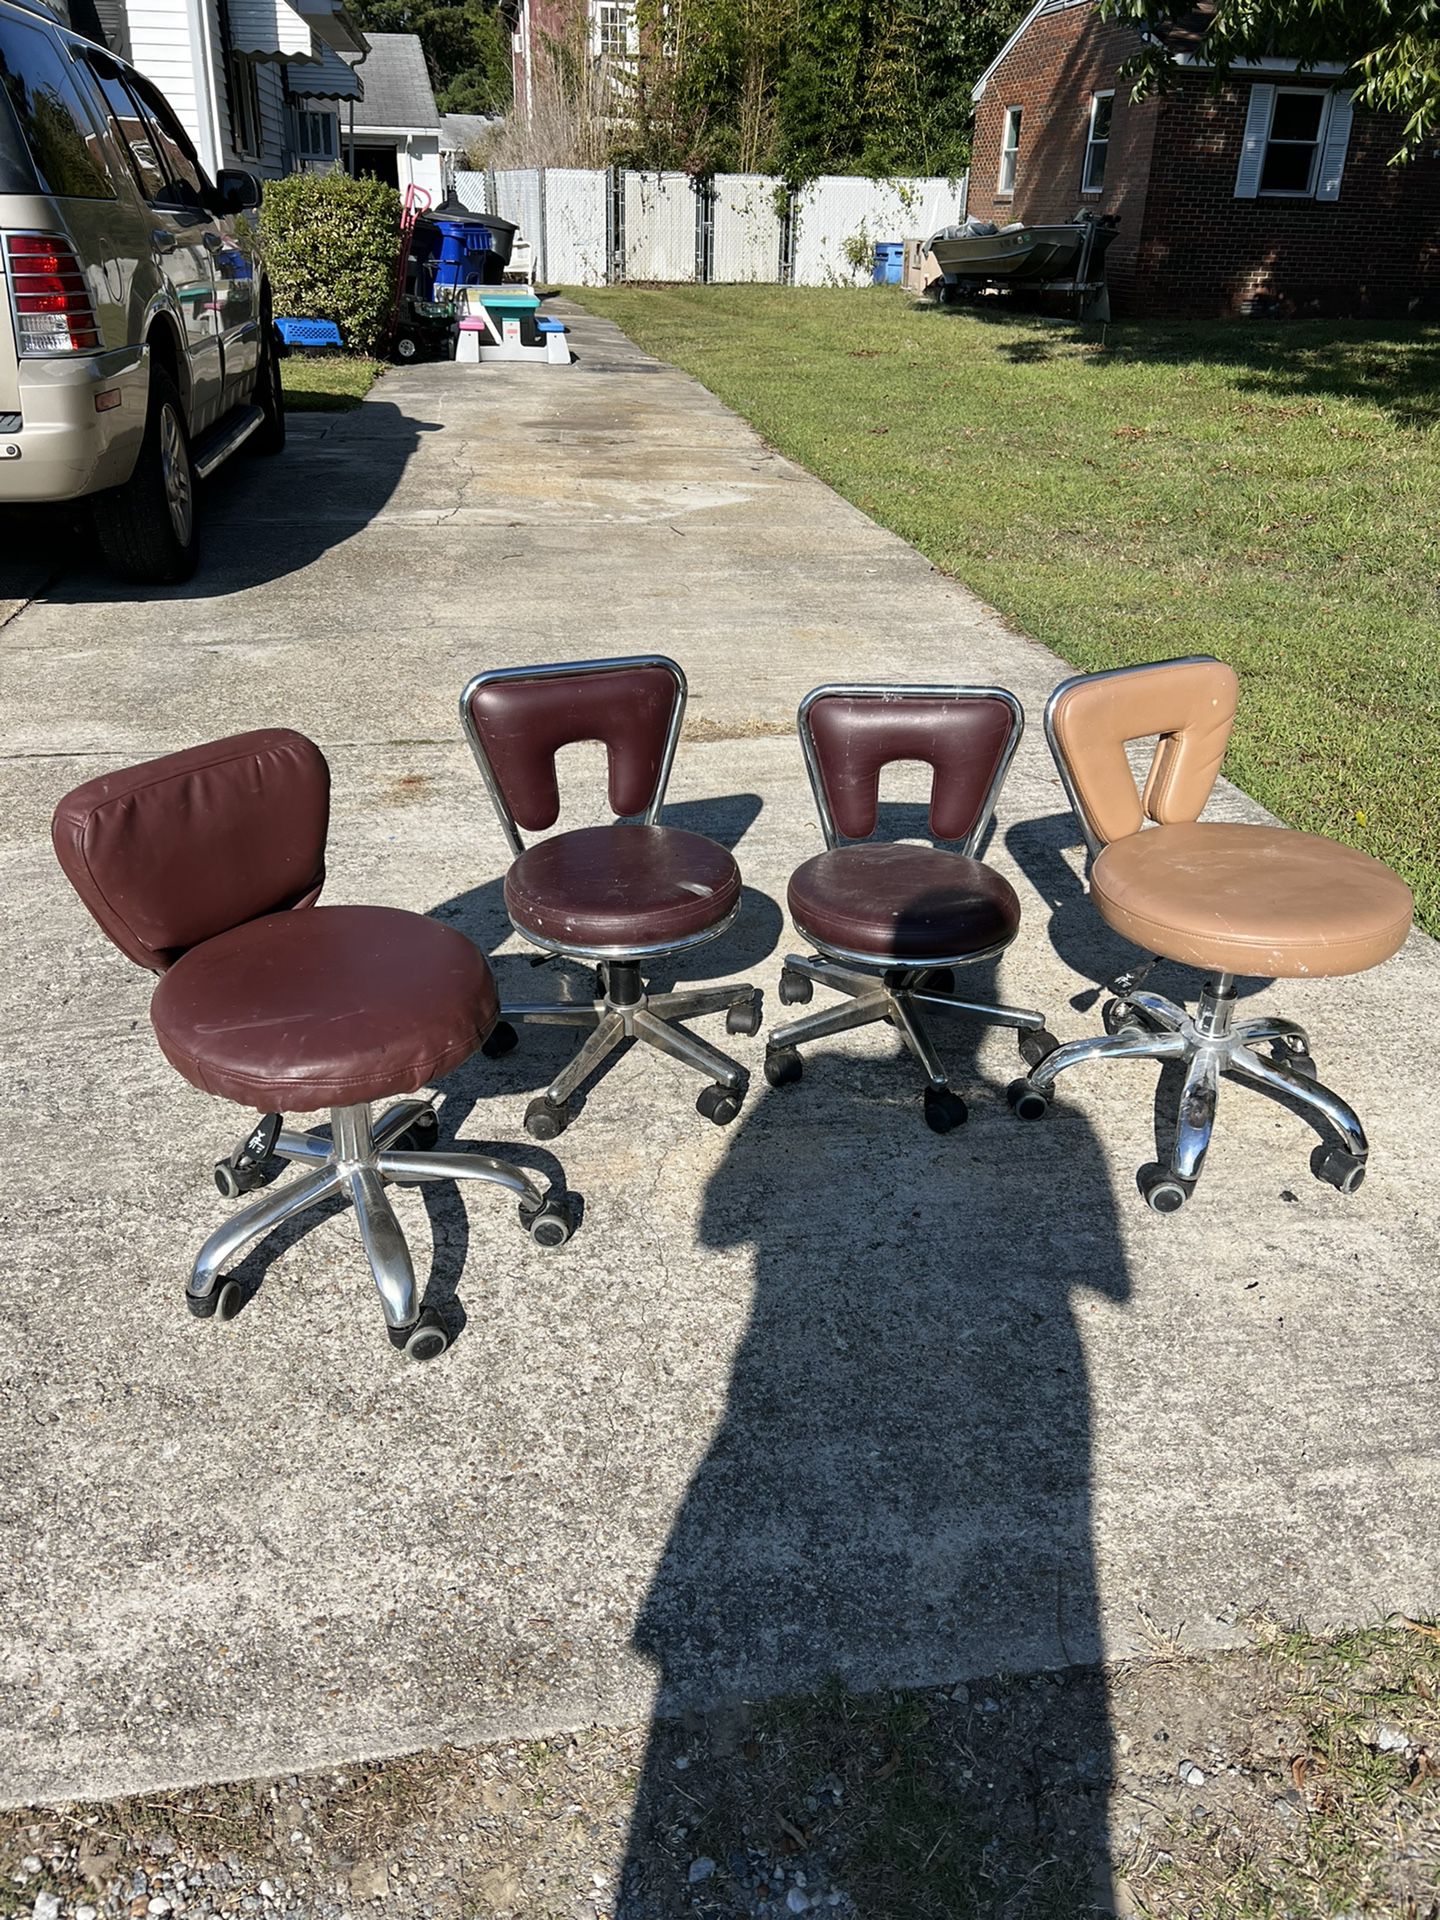 4 Garage/Shop Small Work Stools- Great For Brake Jobs-etc (25 Each Or 80 For All)